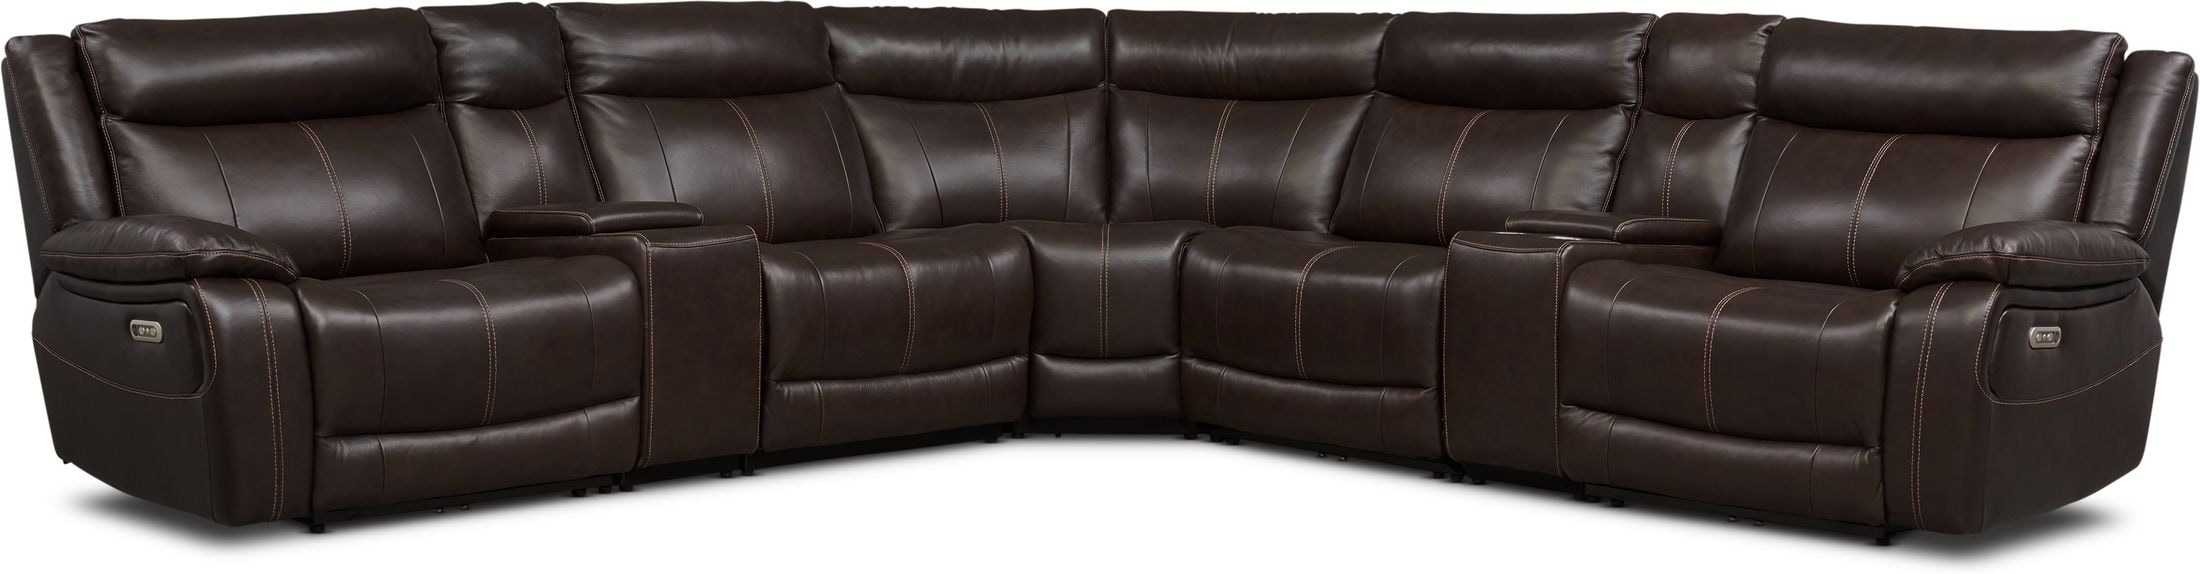 Vince 7 Piece Dual Power Reclining, Danvors 7 Pc Leather Sectional Sofa Reviews